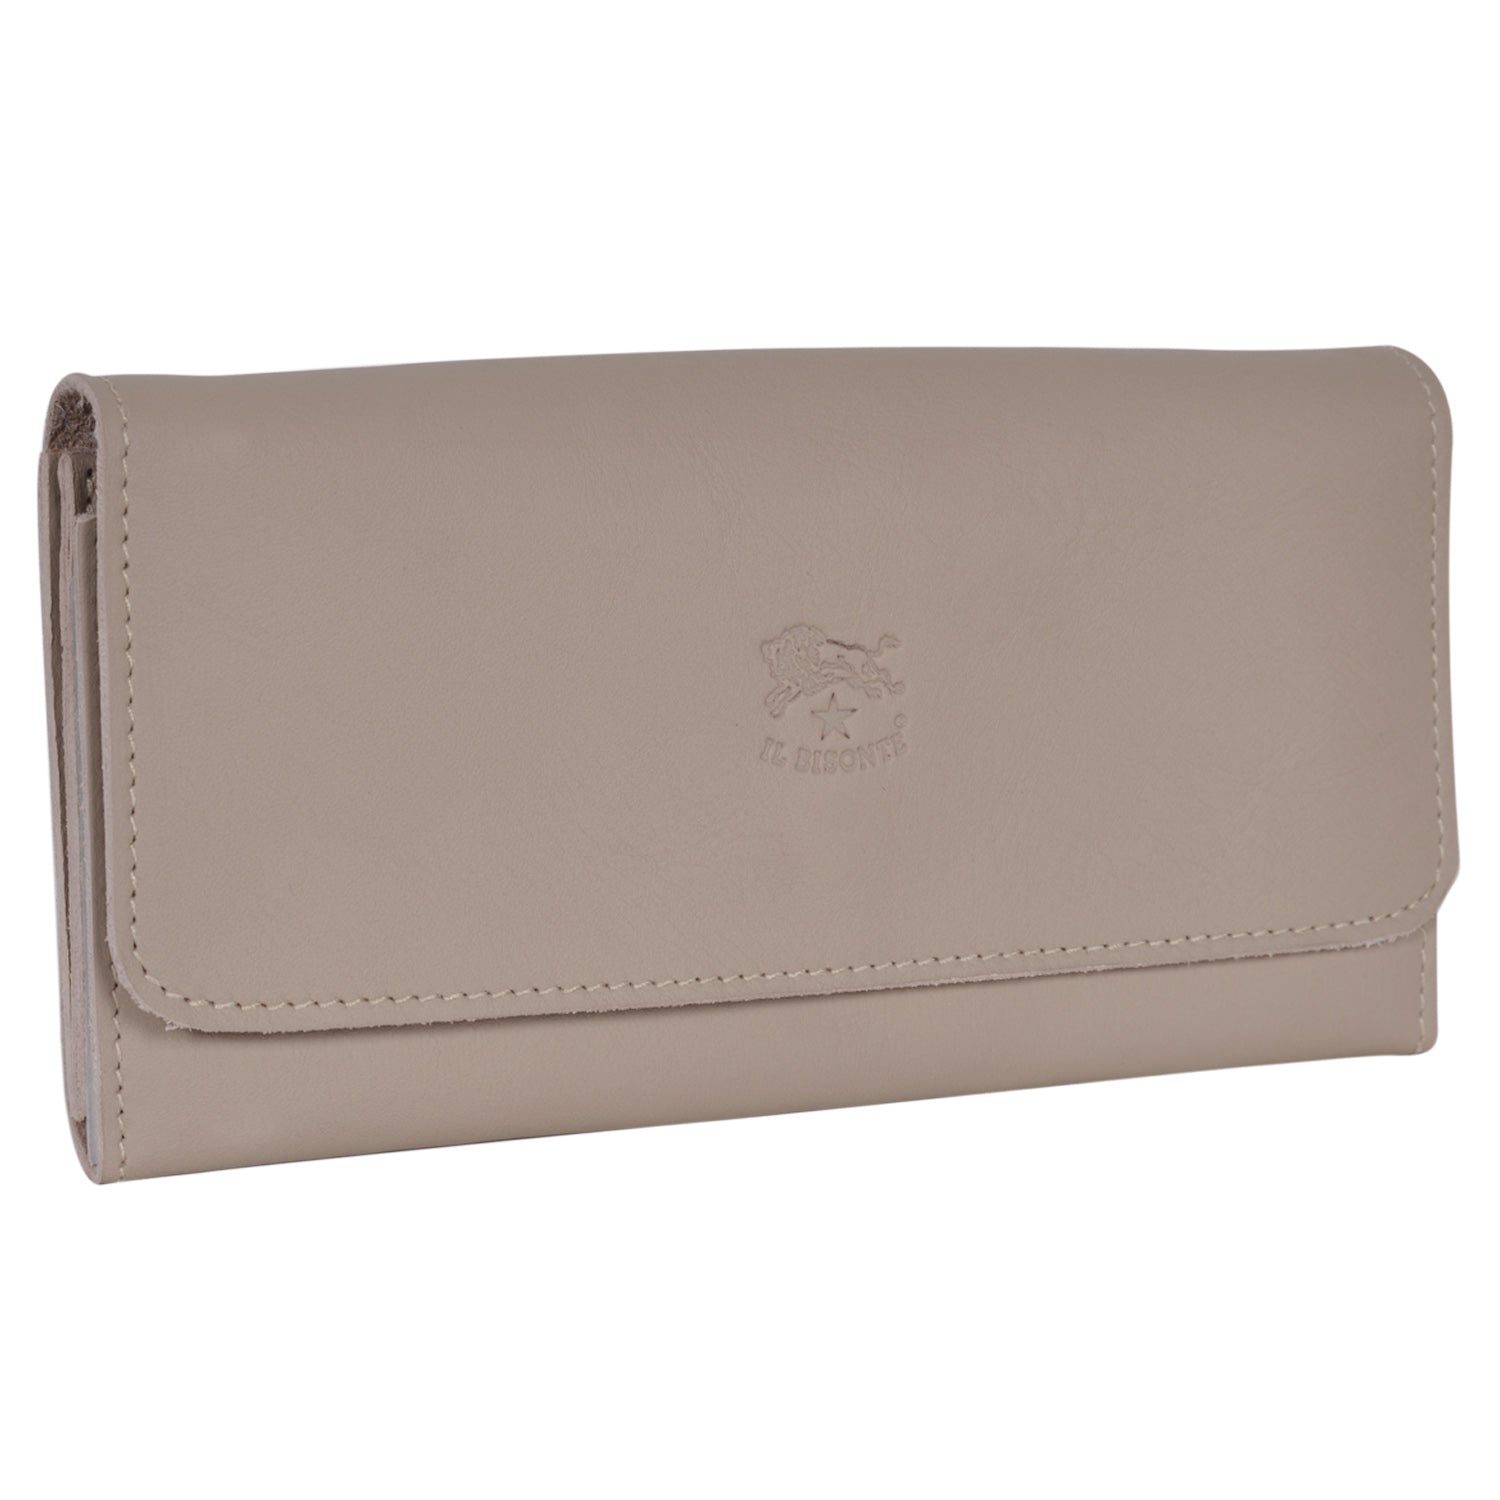 IL BISONTE WOMEN'S TRI-FOLD WALLET IN NATURAL  COWHIDE LEATHER